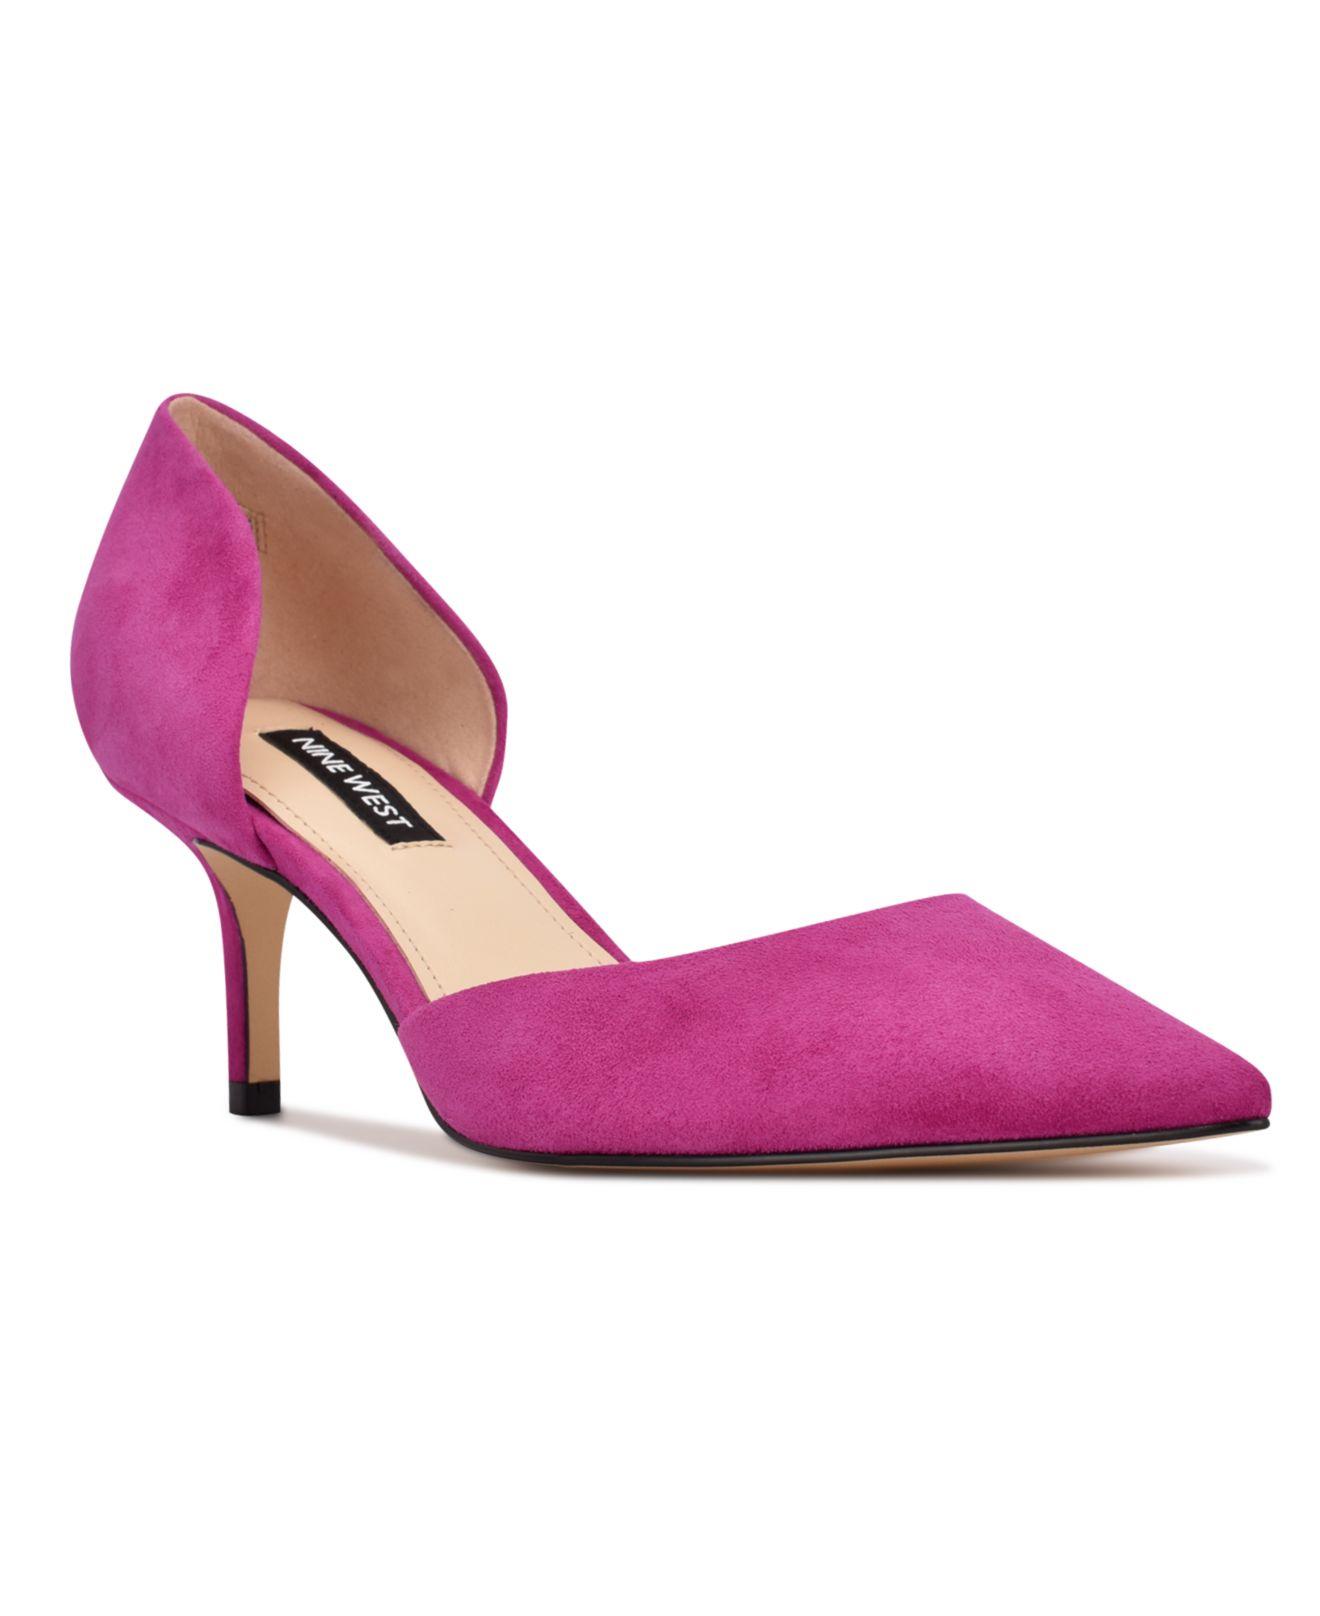 Nine West Arive Pointy Toe Pumps in Pink | Lyst